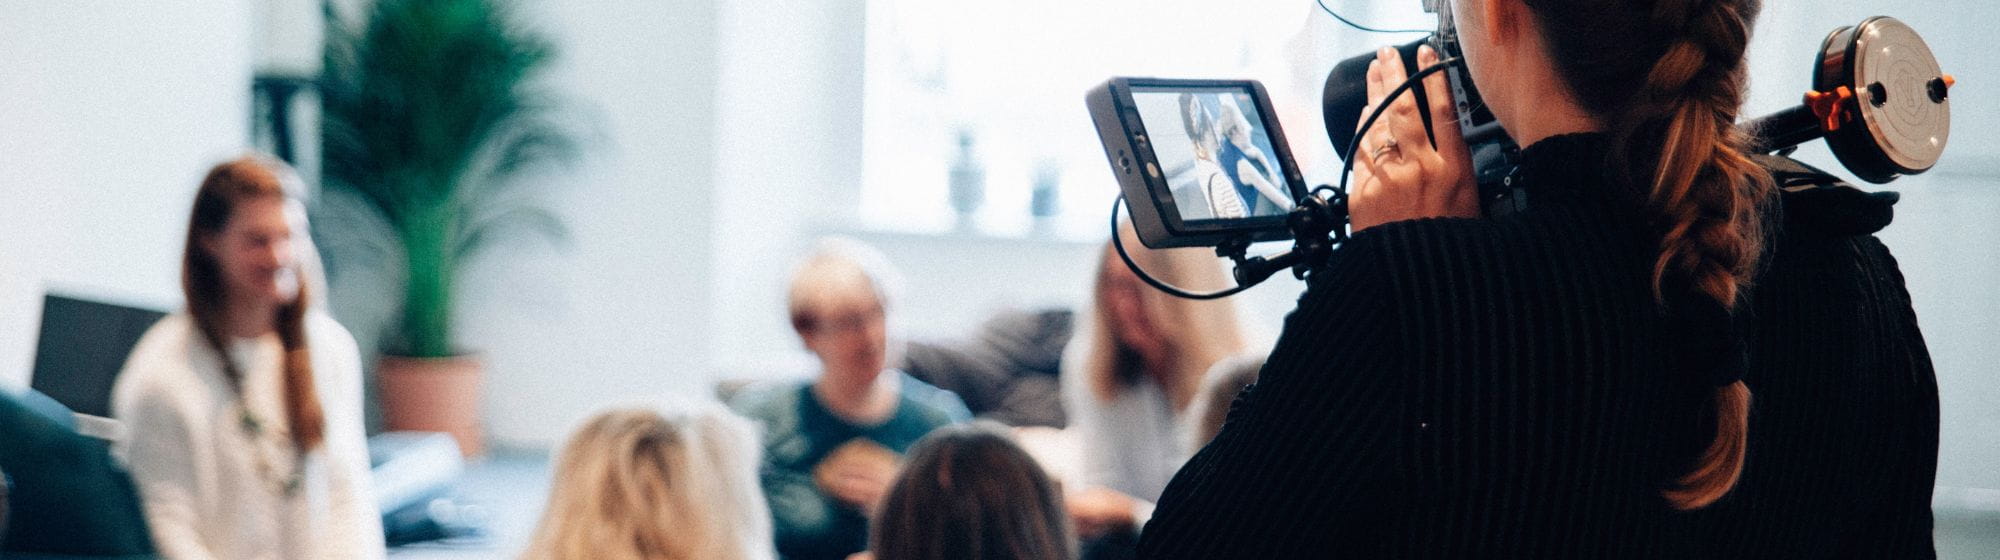 A woman filming a meeting